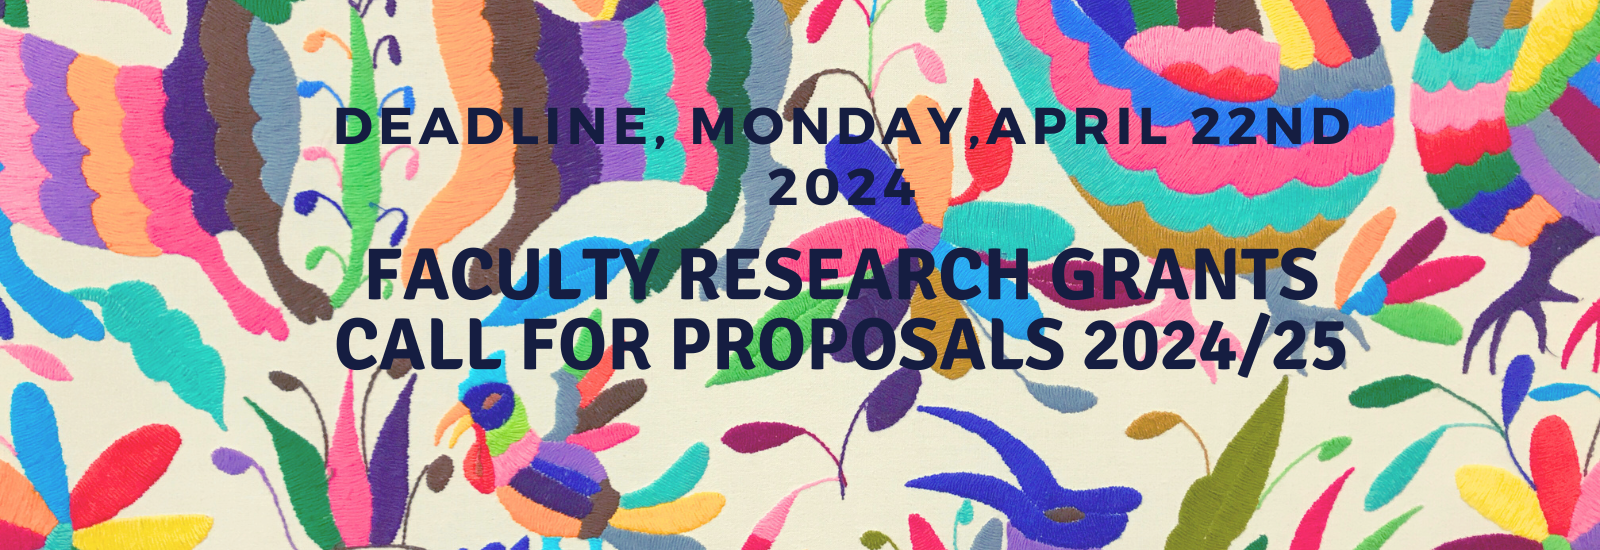 deadline-faculty-call-for-proposals-1600x550jpg.png